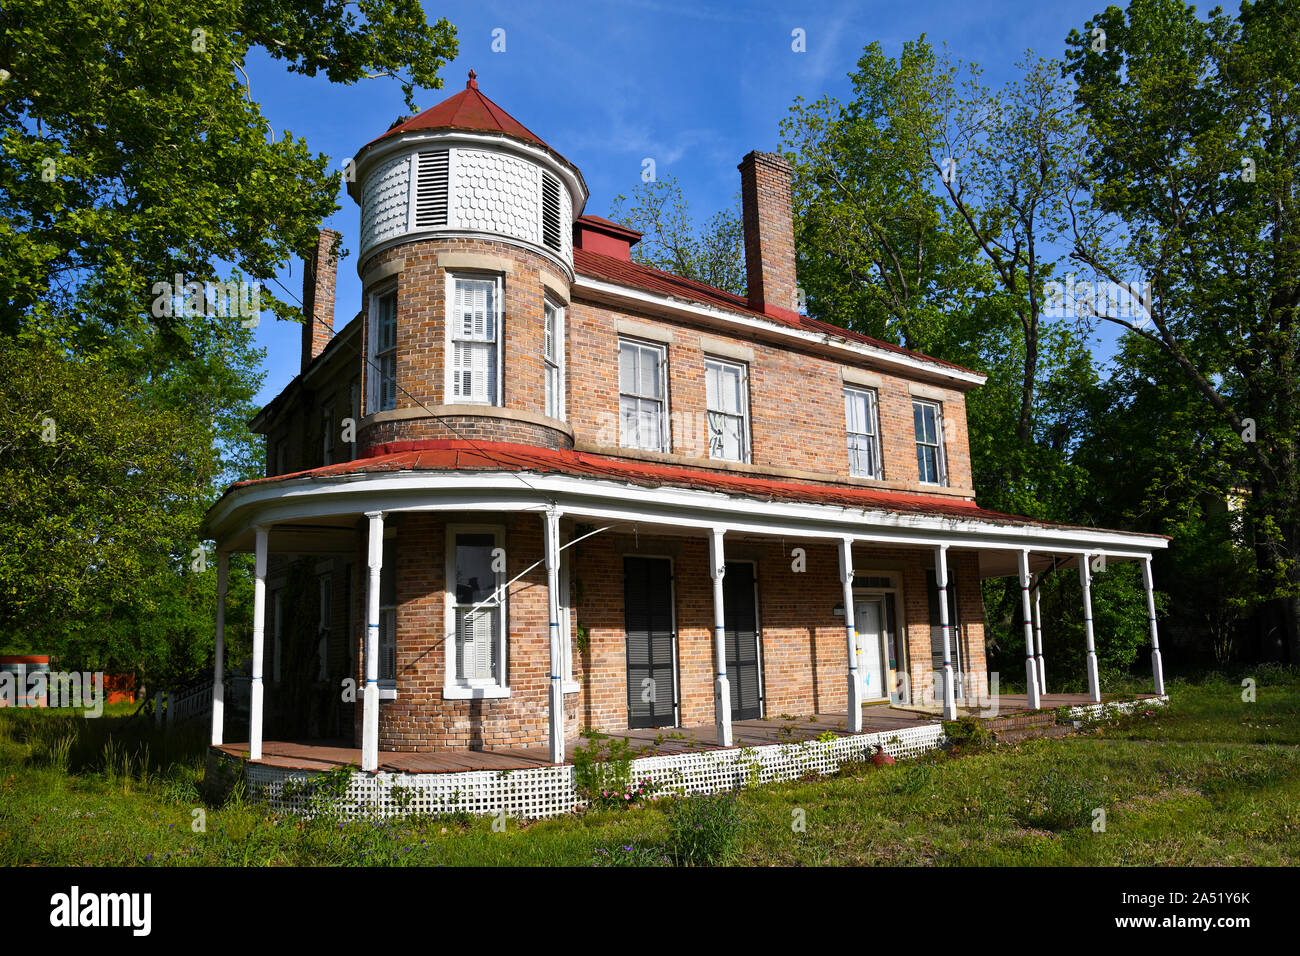 An Old Abandoned Two-Story House in a Small Rural Southern Town Stock Photo